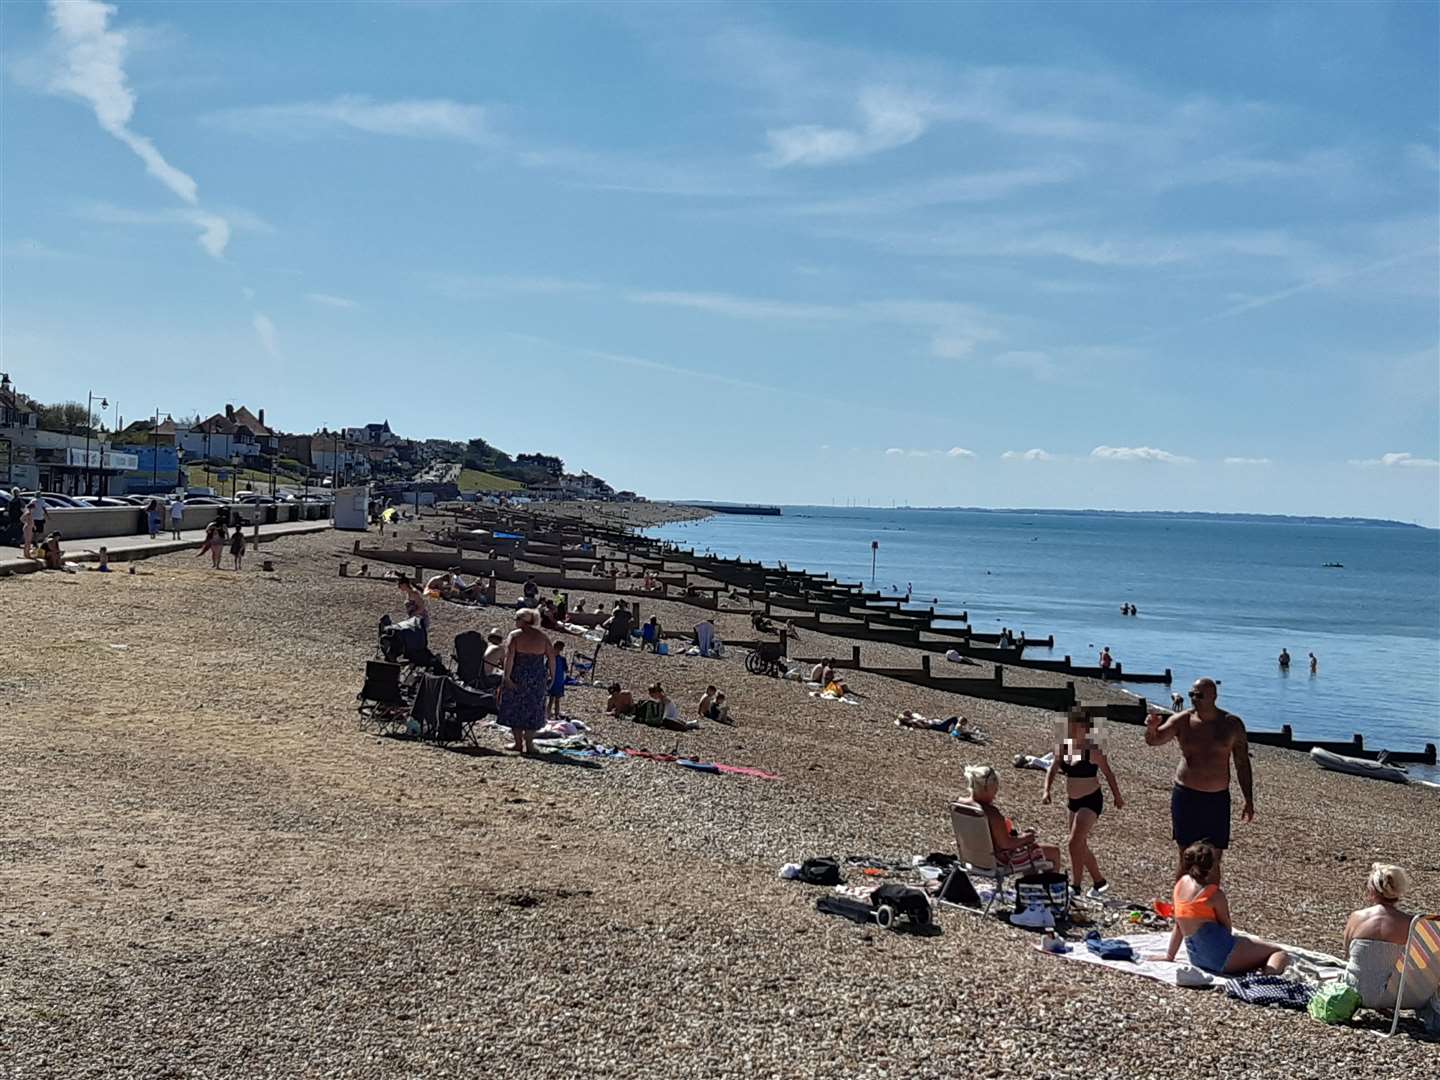 The county's beaches are set to prove popular again this weekend